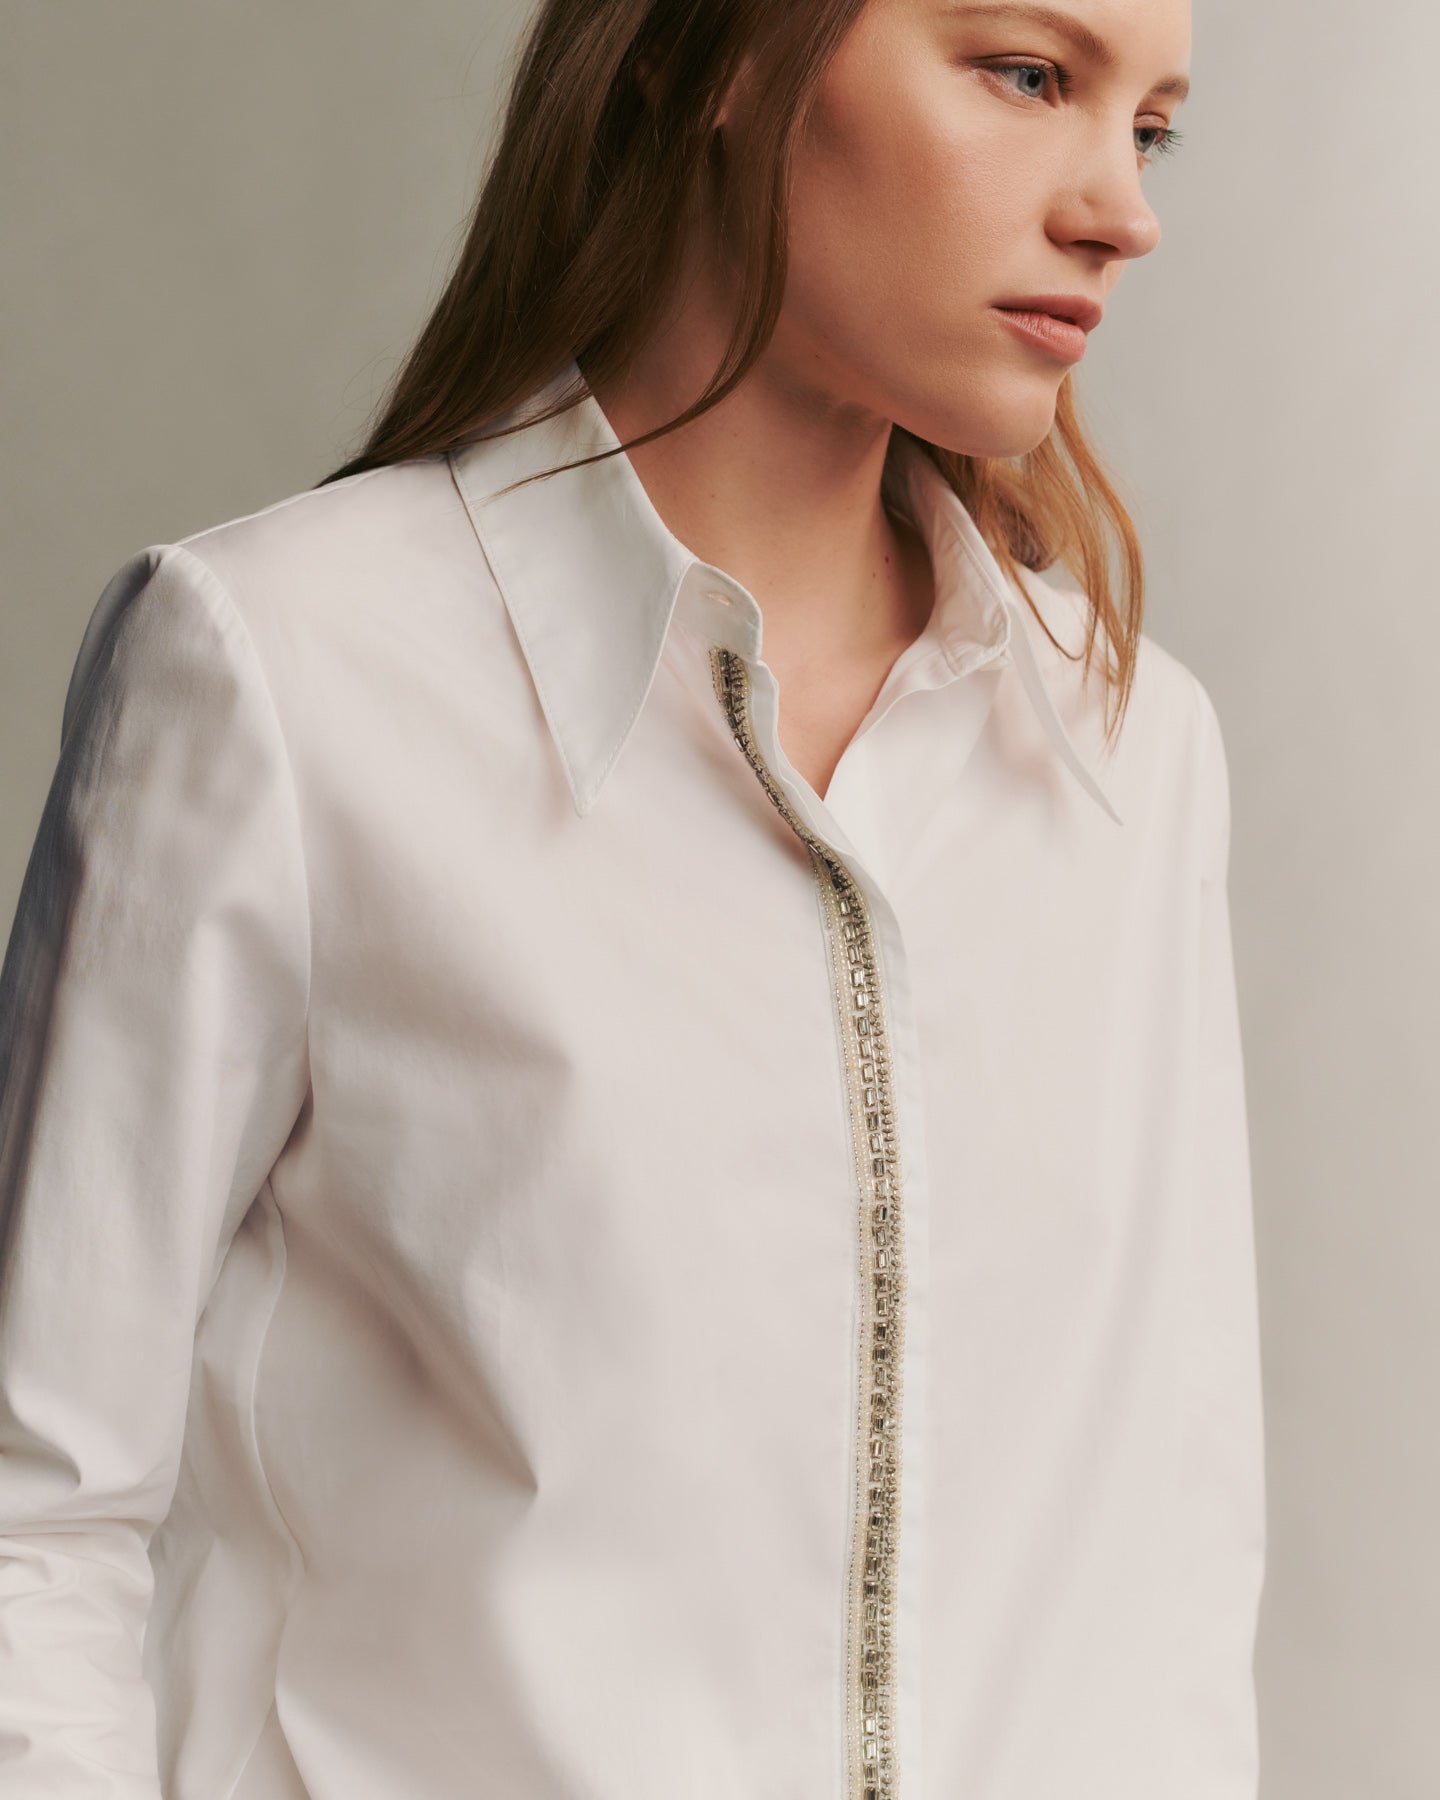 TWP White Object Of Affection Top With Embellished Placket in Superfine Cotton view 4